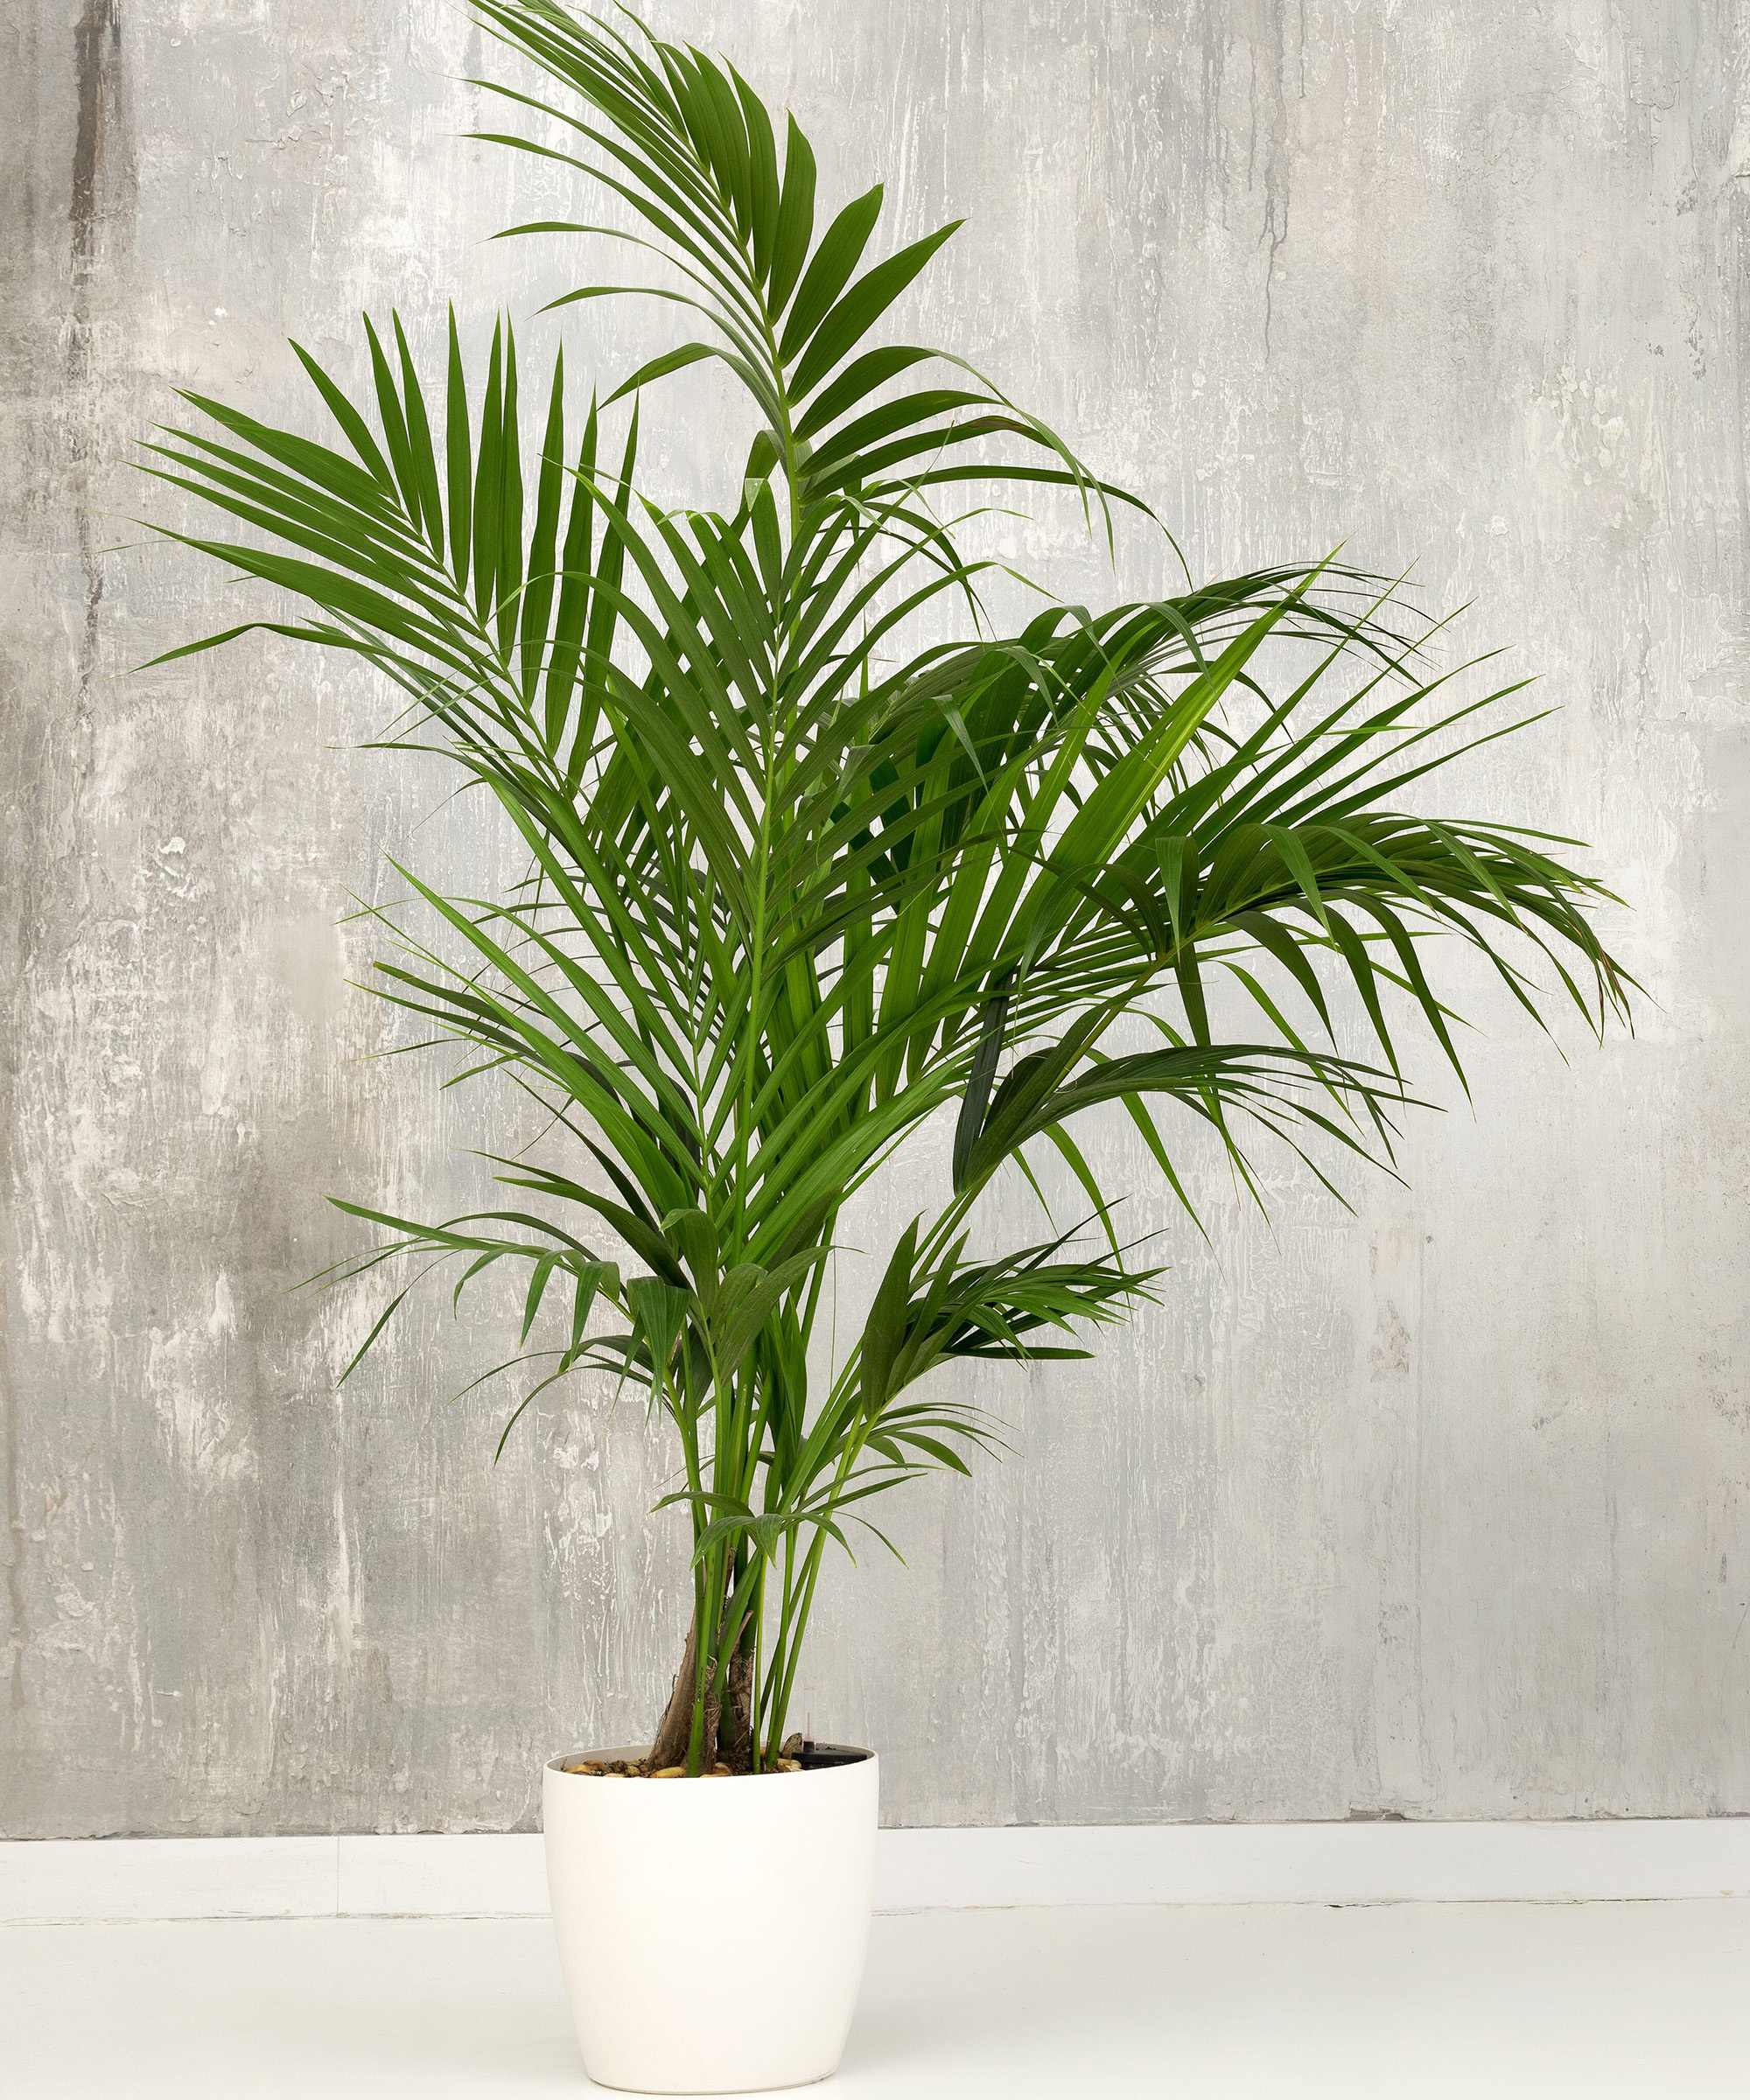 Fresh green fronds of a potted Kentia palm plant growing in a small white container